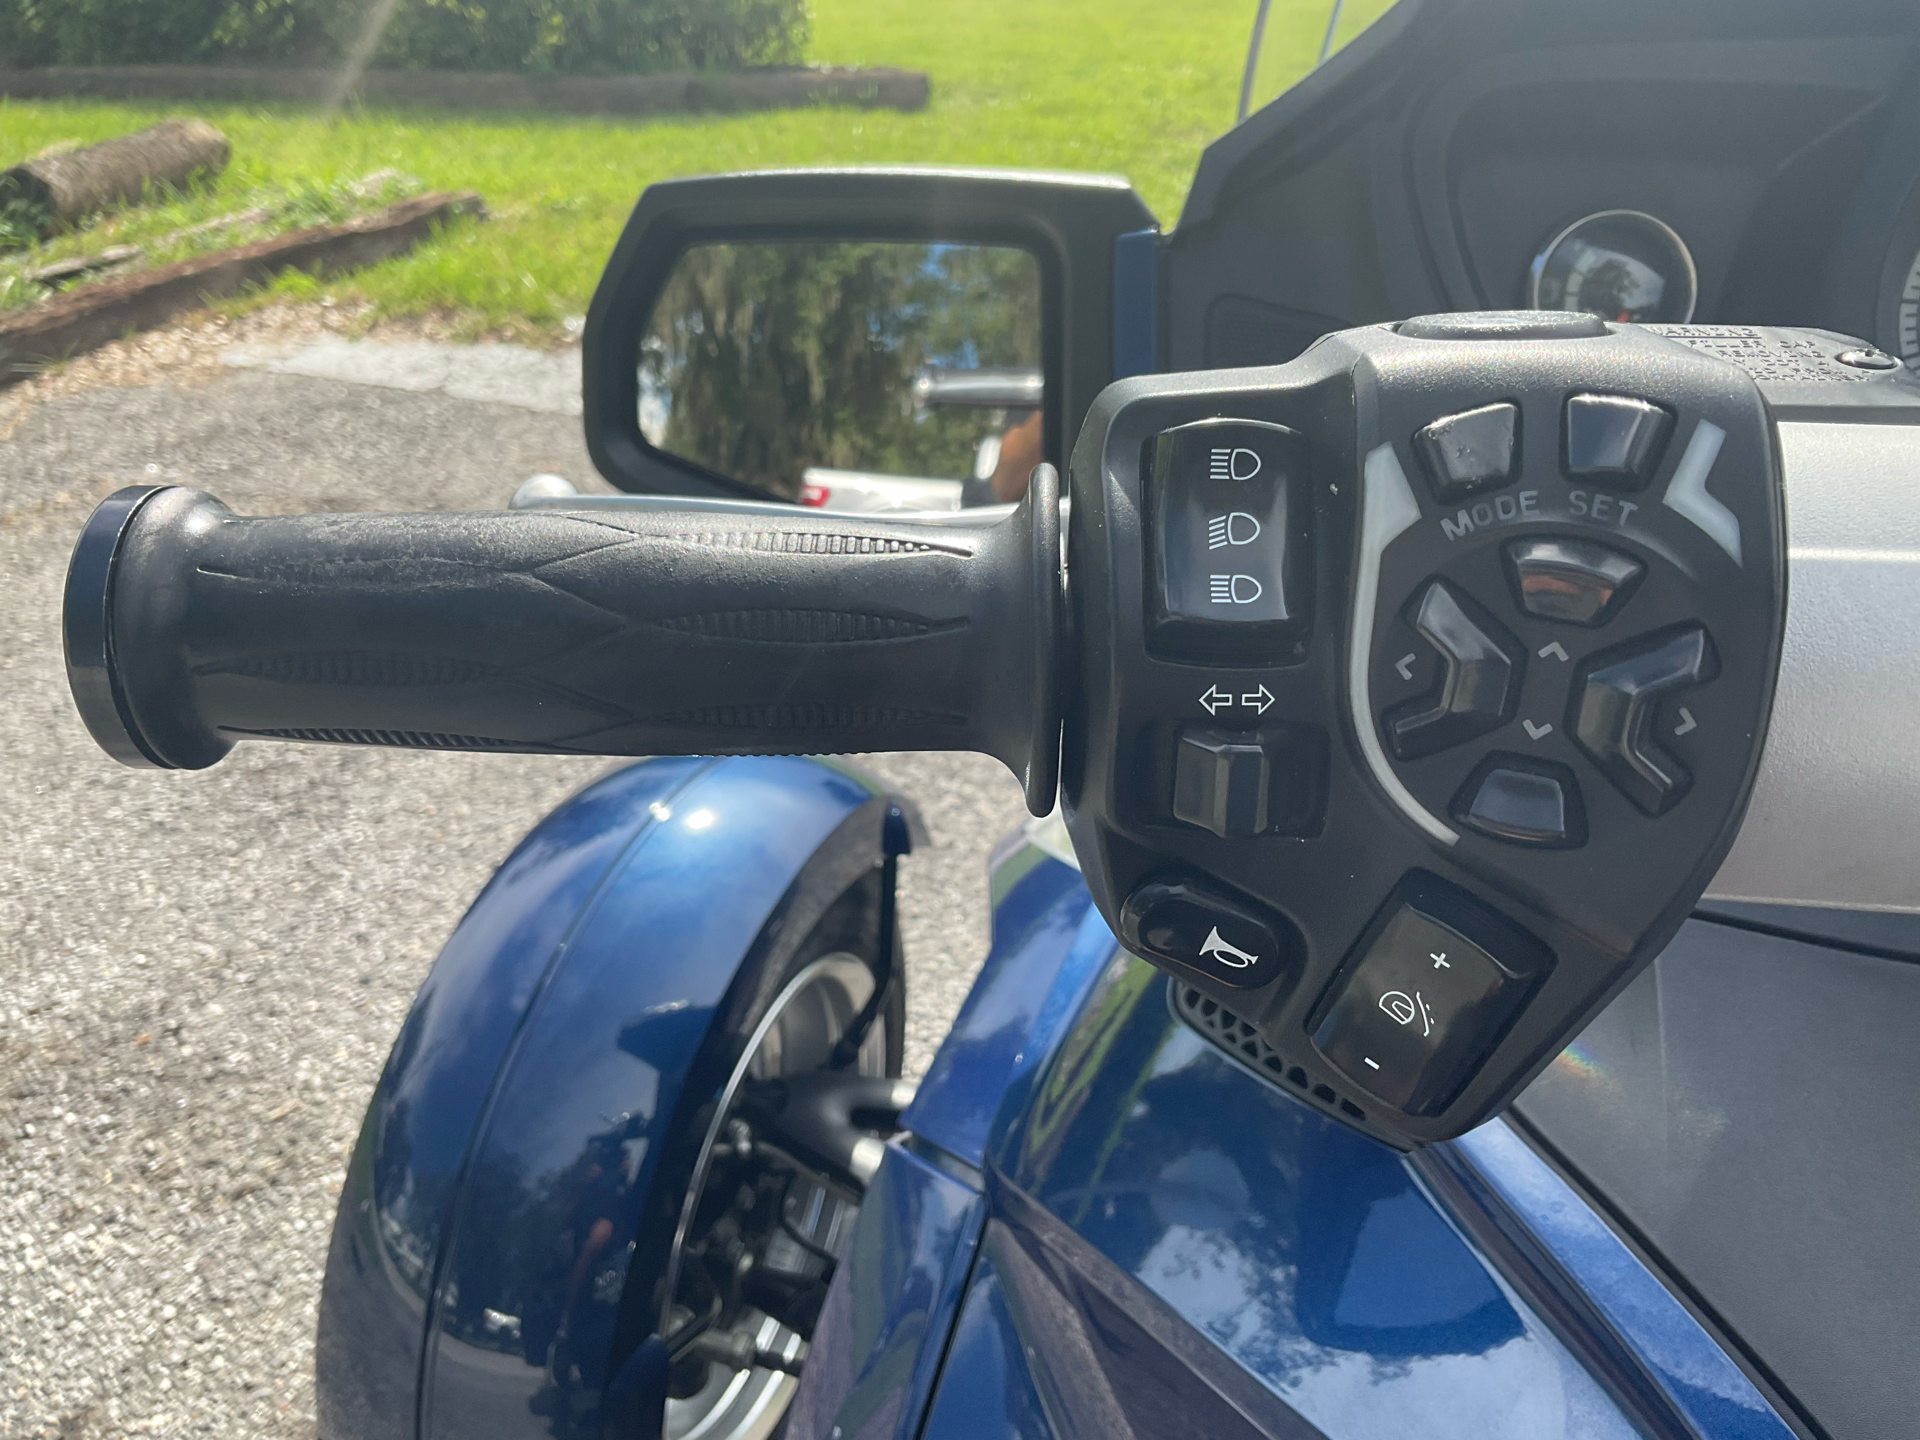 2011 Can-Am Spyder® RT-S SM5 in Sanford, Florida - Photo 32